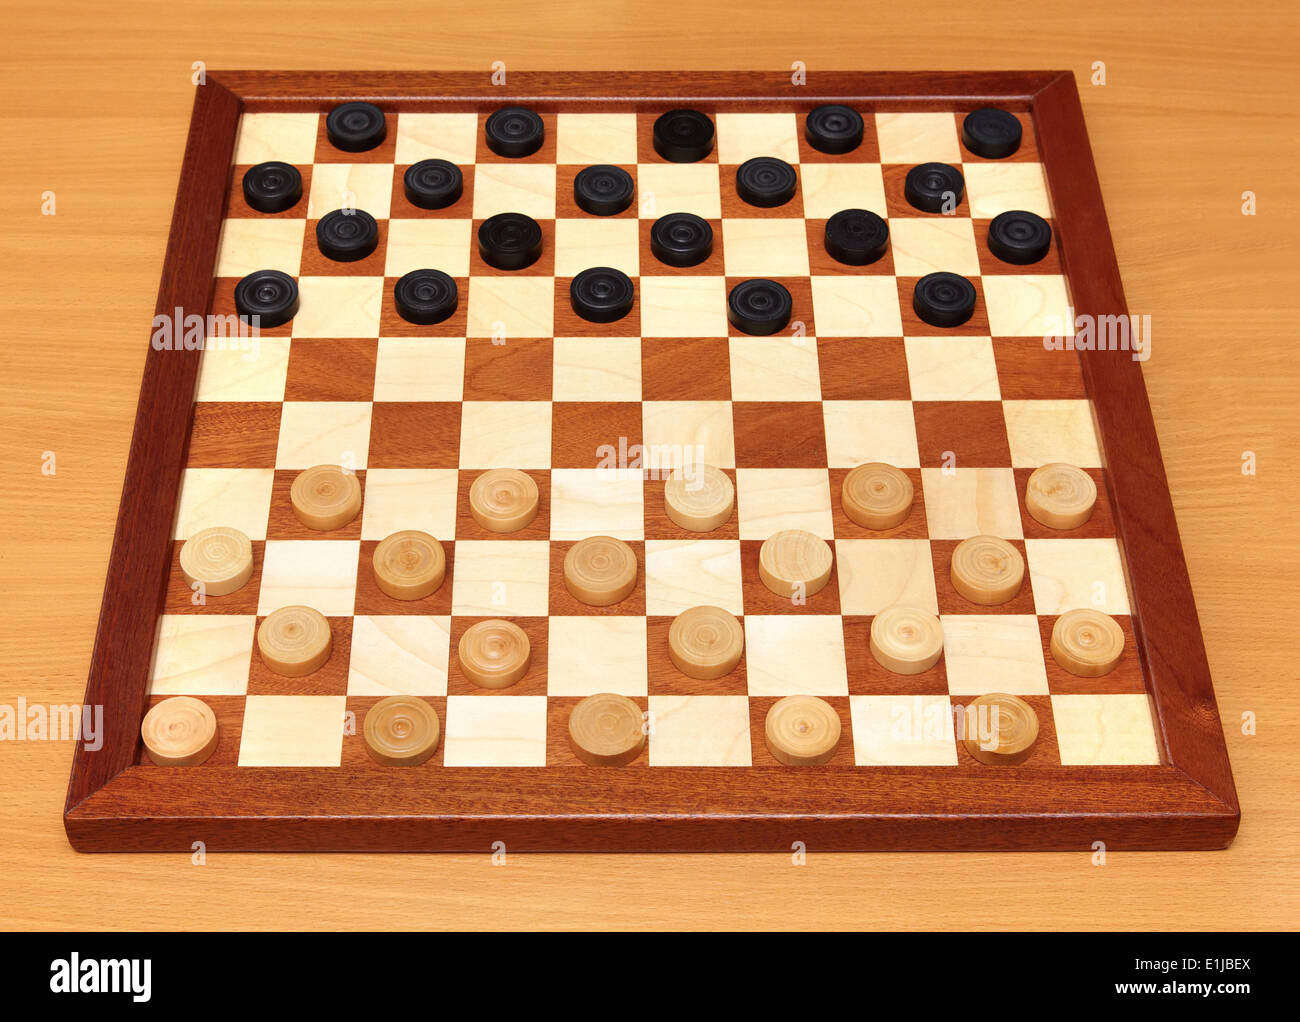 Checkers Dama chess board - Play UNBLOCKED Checkers Dama chess board on  DooDooLove